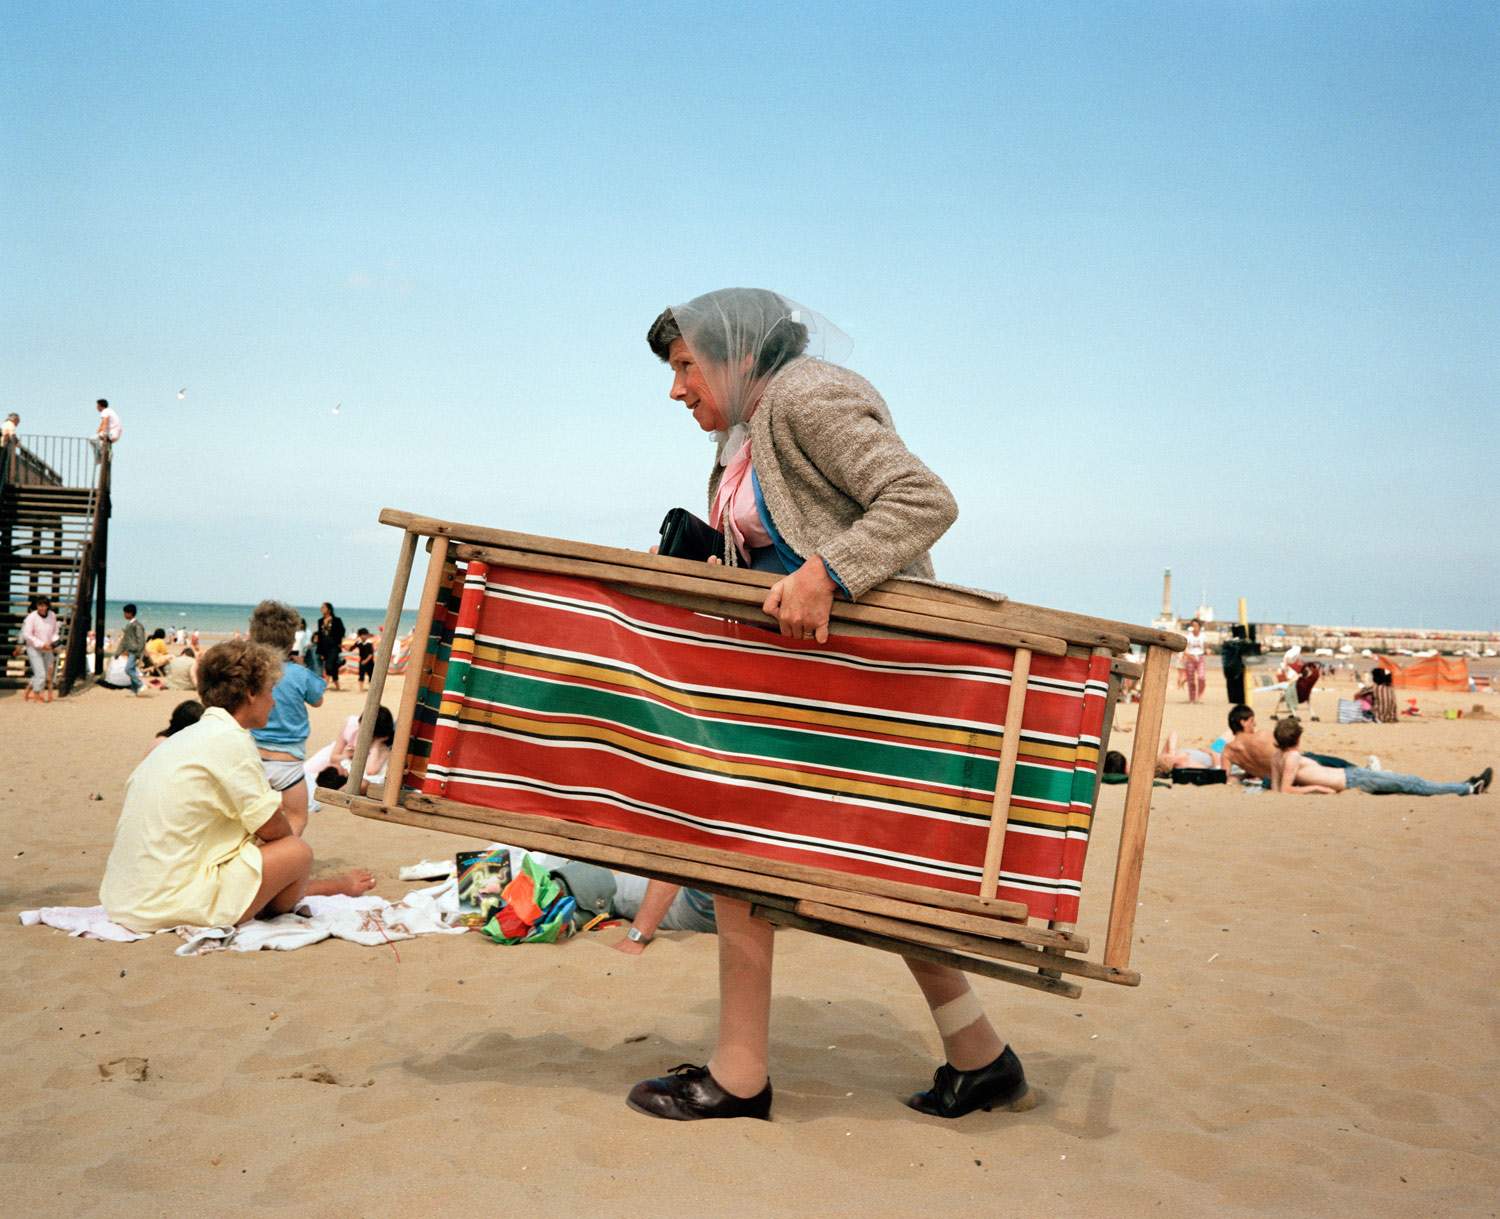 British photographer Martin Parr's trashy beaches are on display in Trieste, Italy